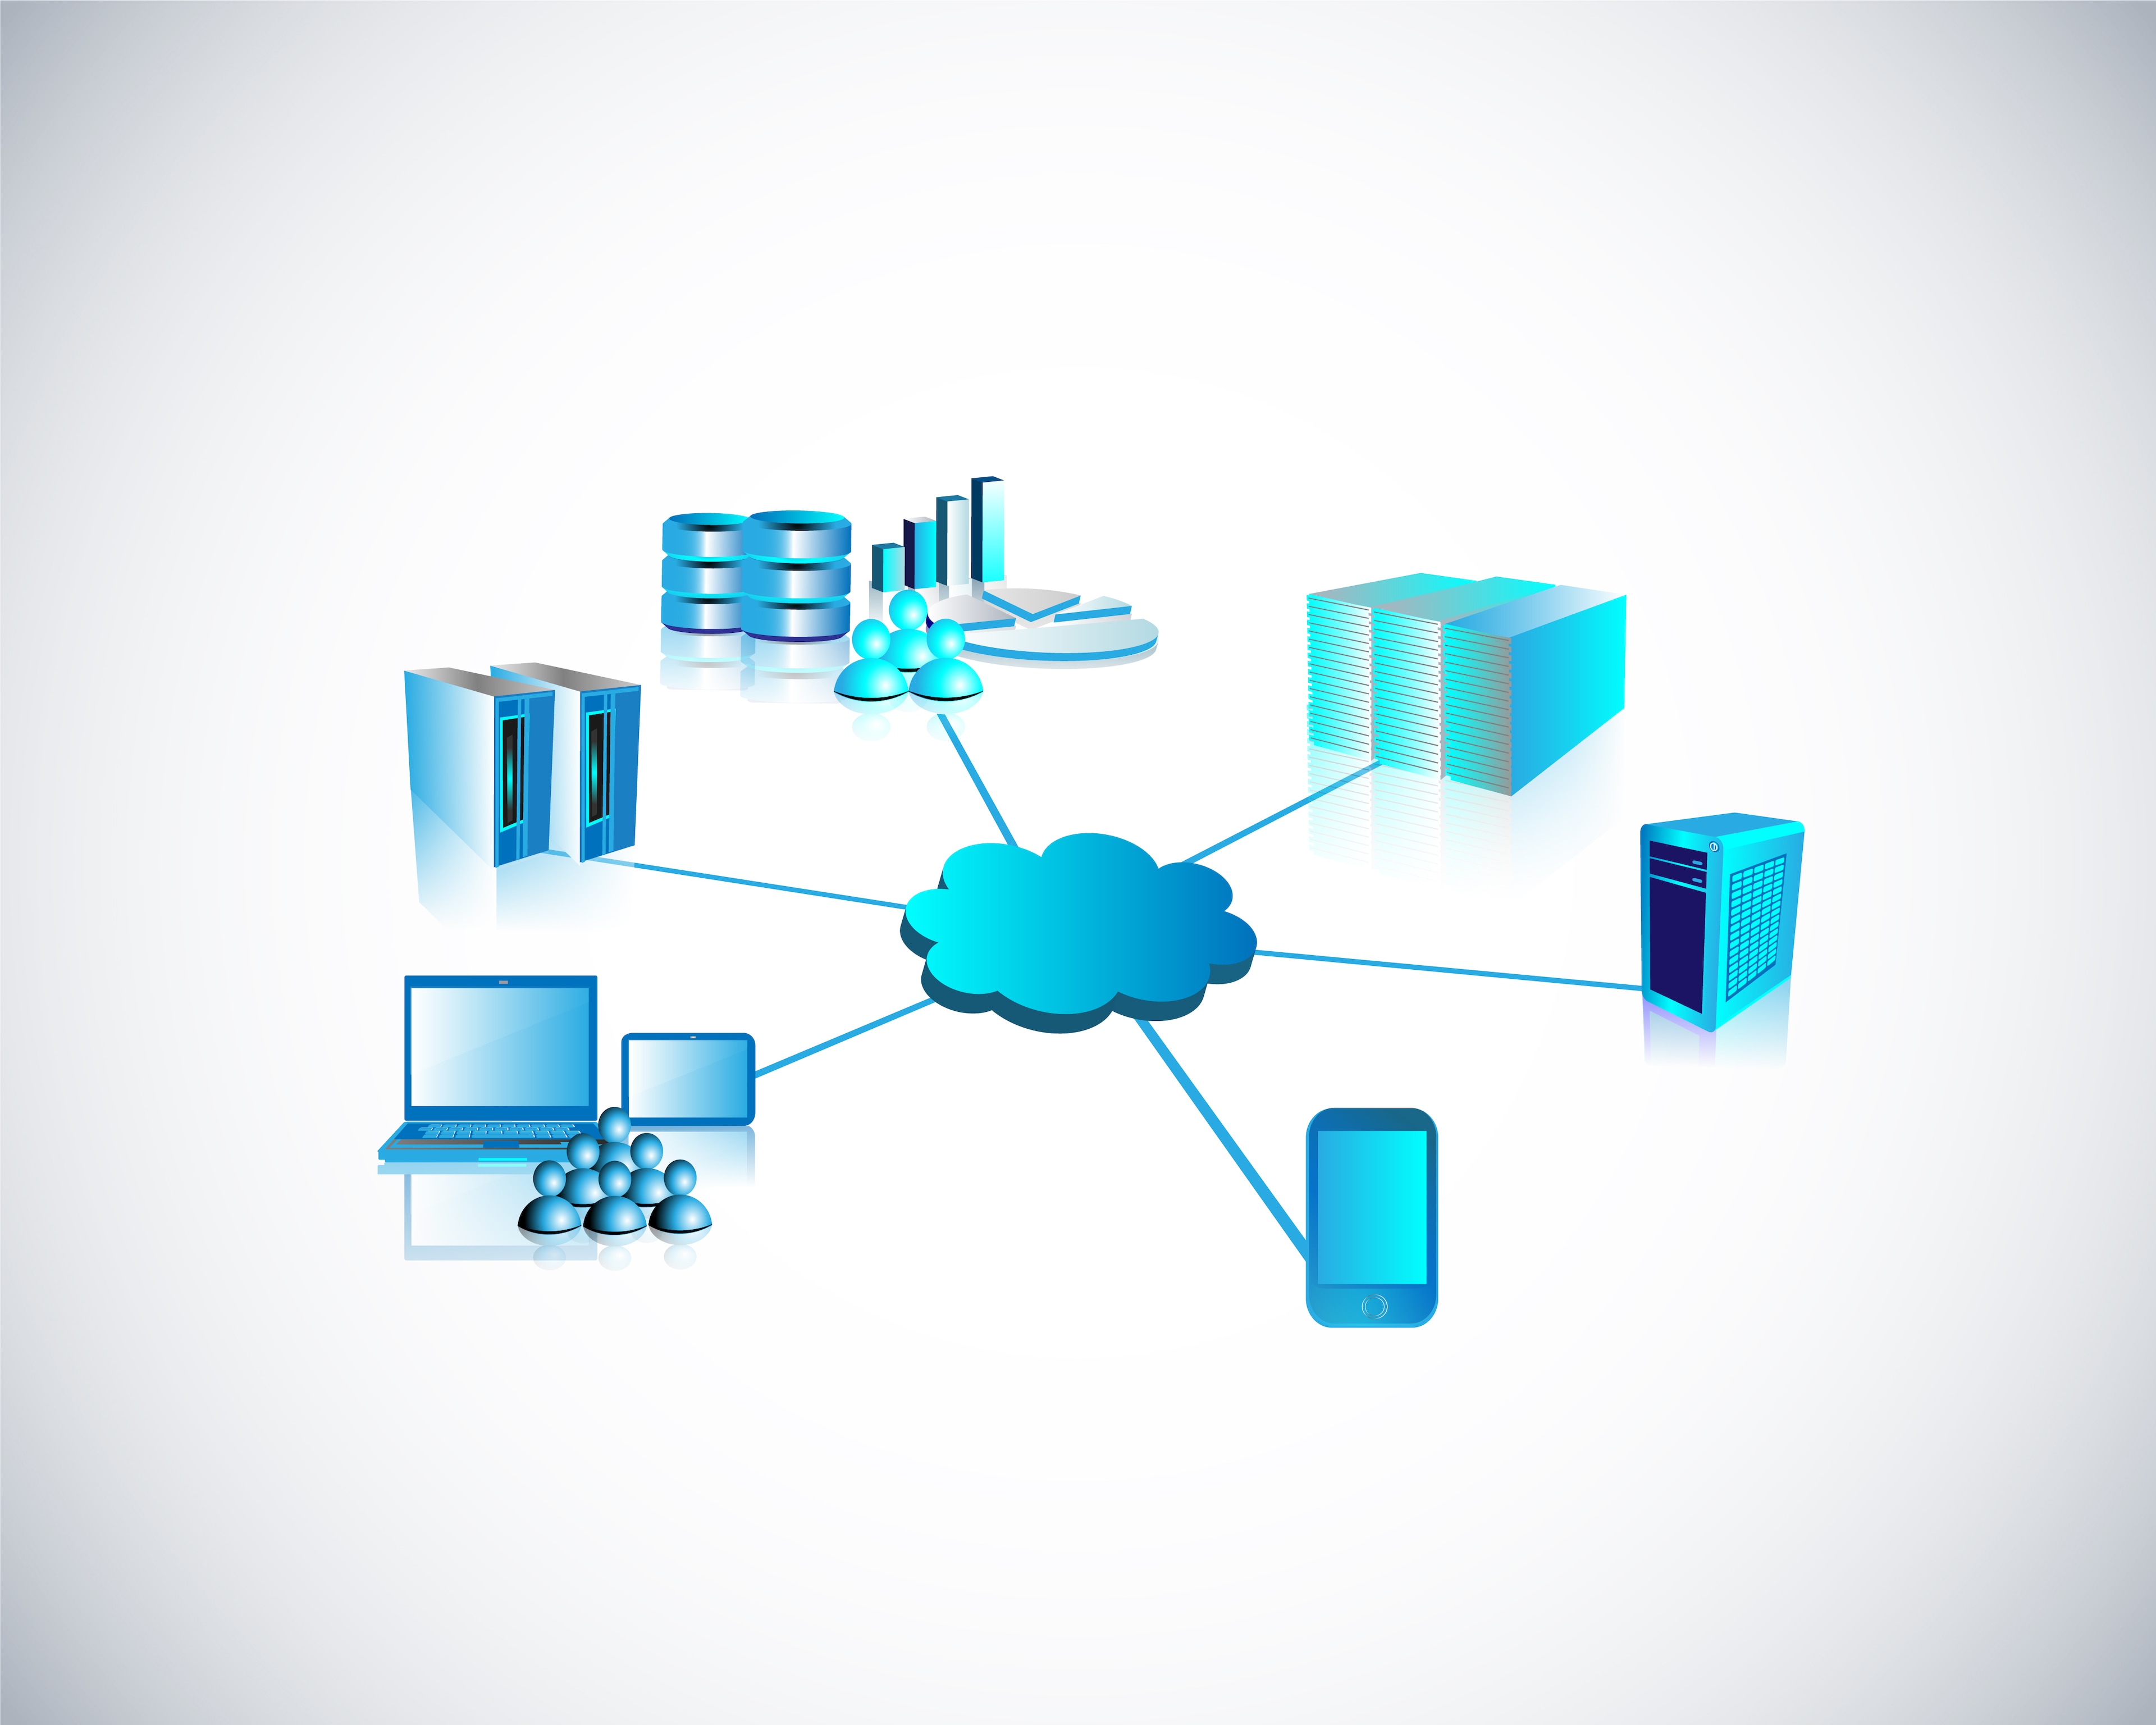 Abstract image of web portal and connectivity concept. Image: TechnoVectors/Shutterstock.com